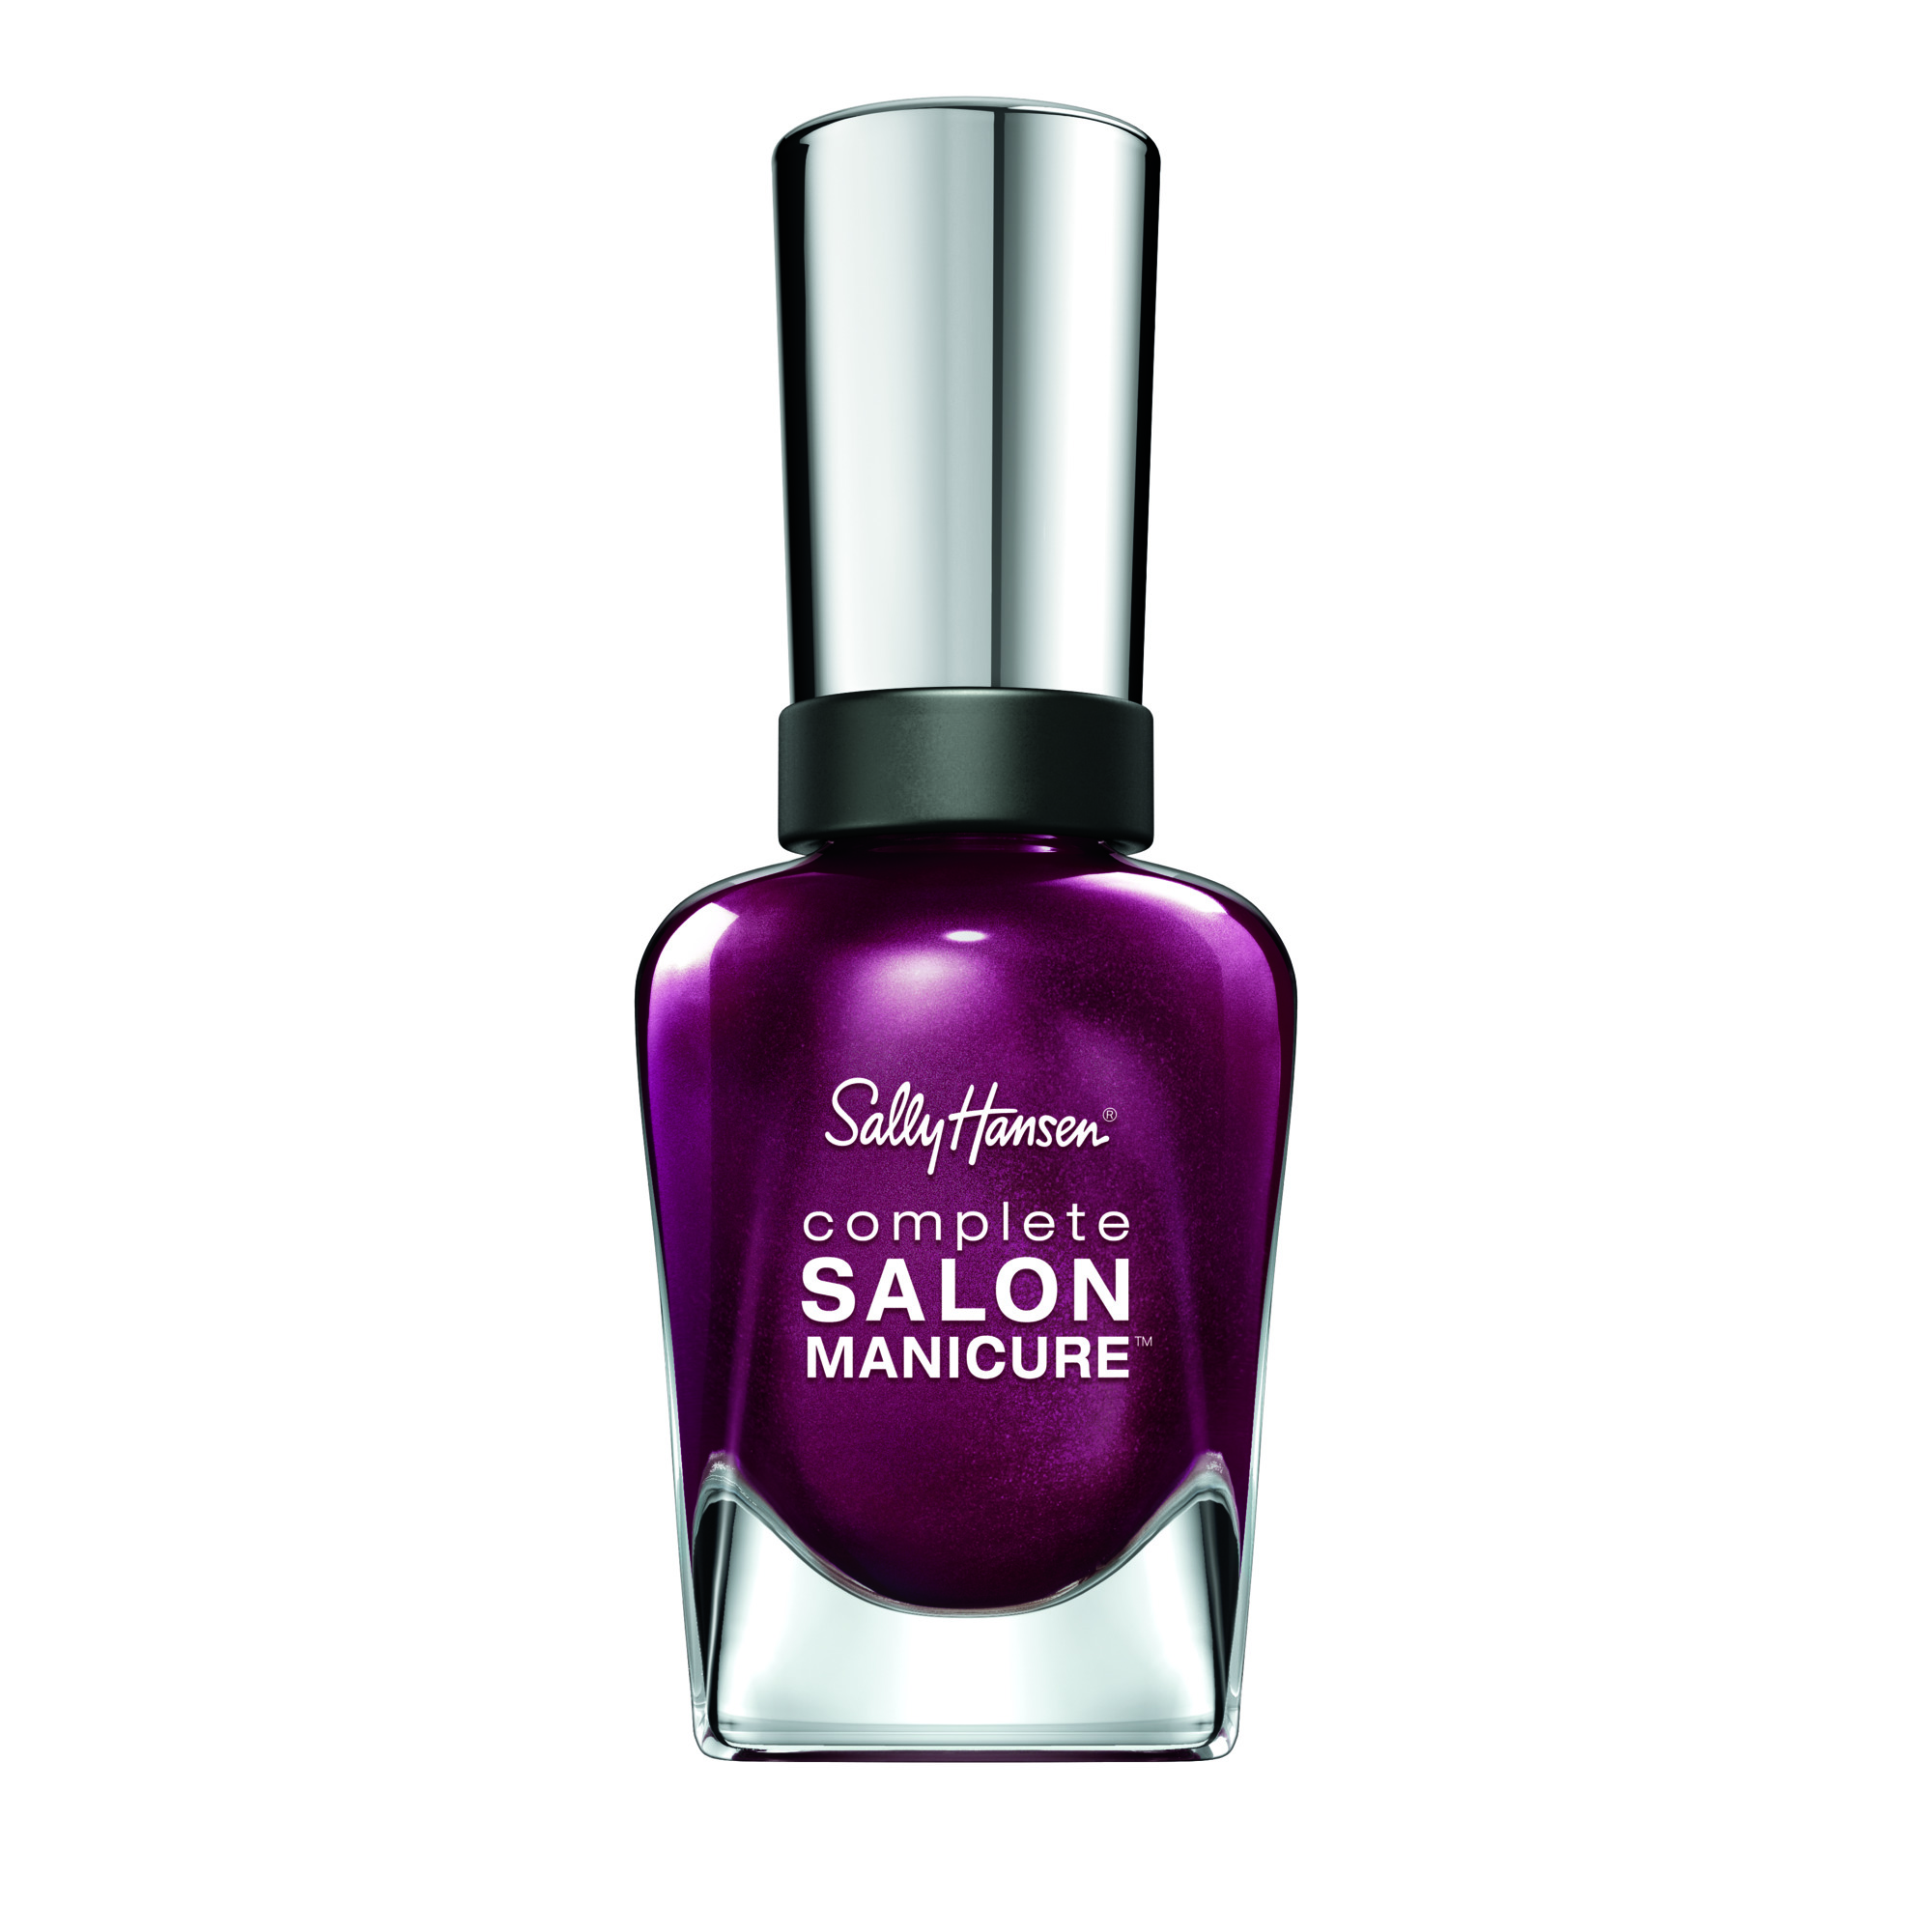 Sally Hansen Complete Salon Manicure Nail Polish, Belle of the Ball - image 1 of 8